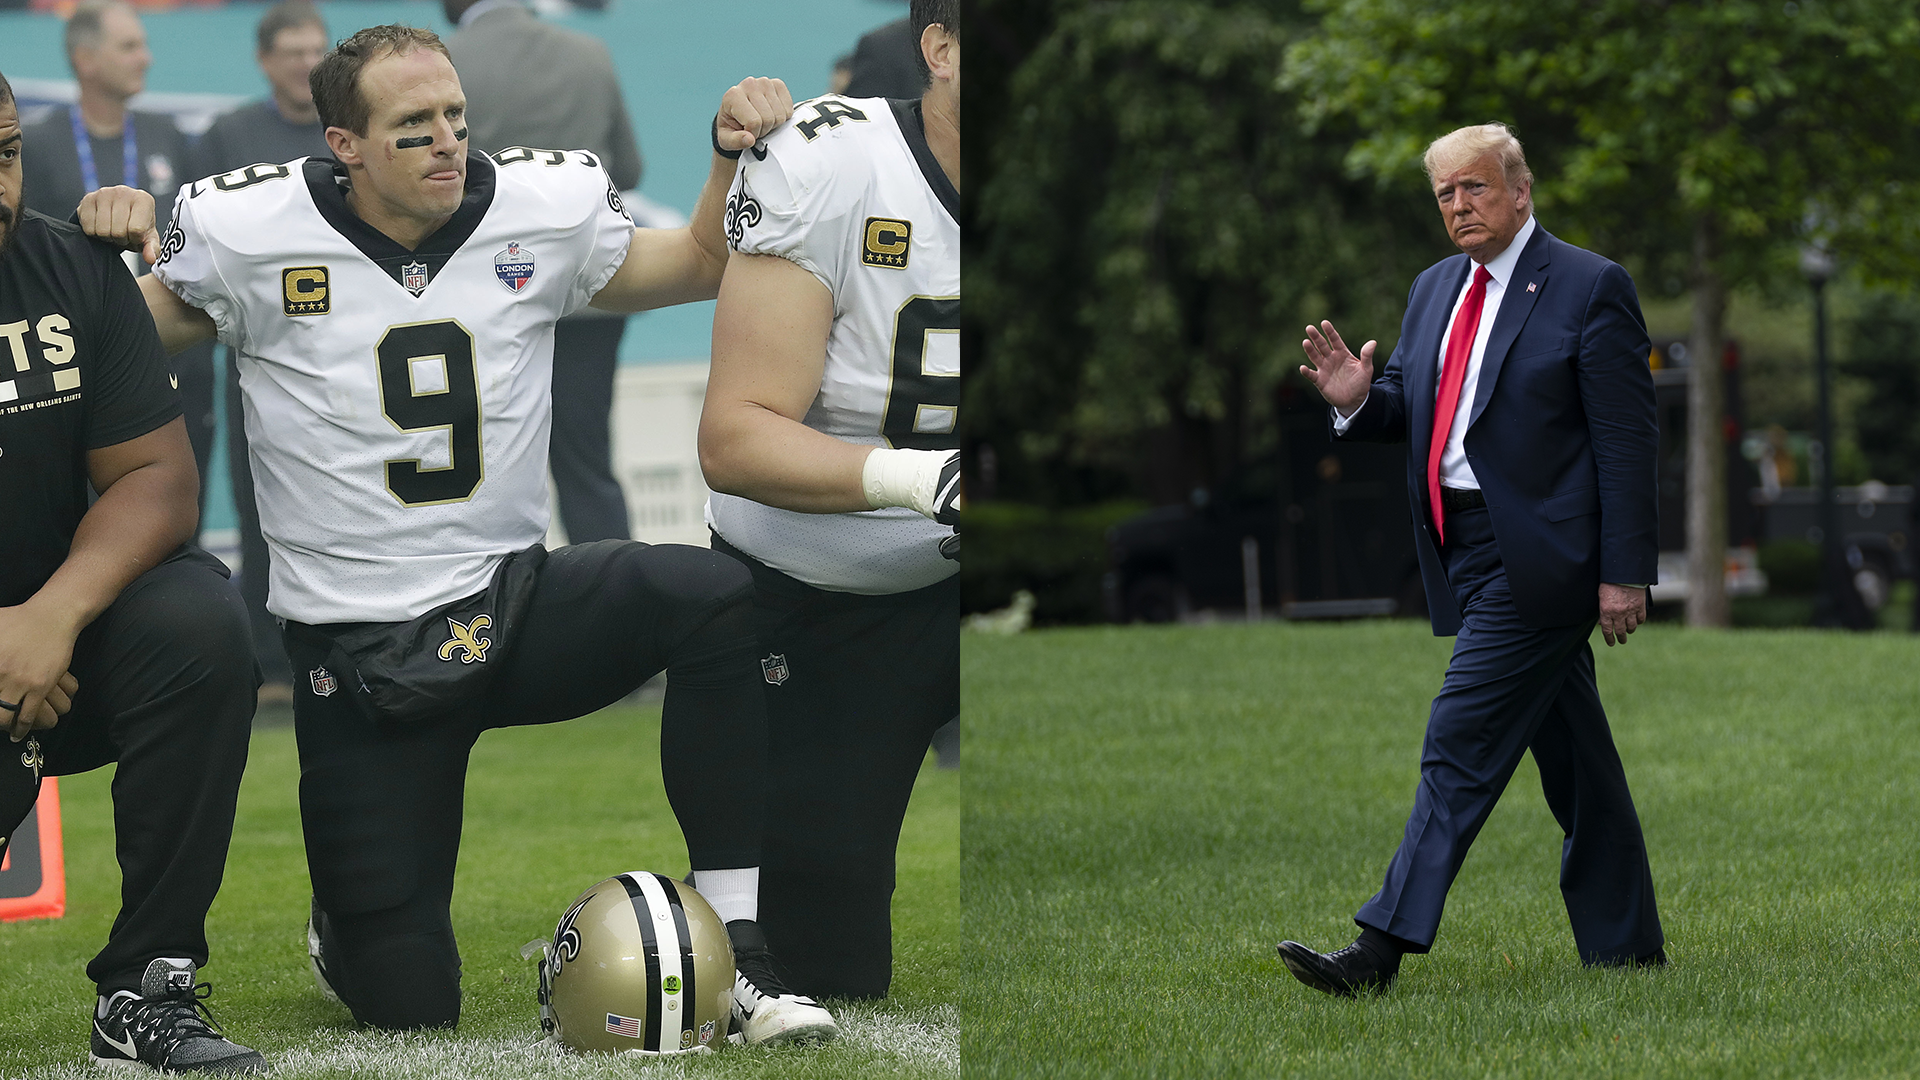 Drew Brees posted a response to Instagram after the president criticized him for backing away from his previous comments about kneeling during the National Anthem.